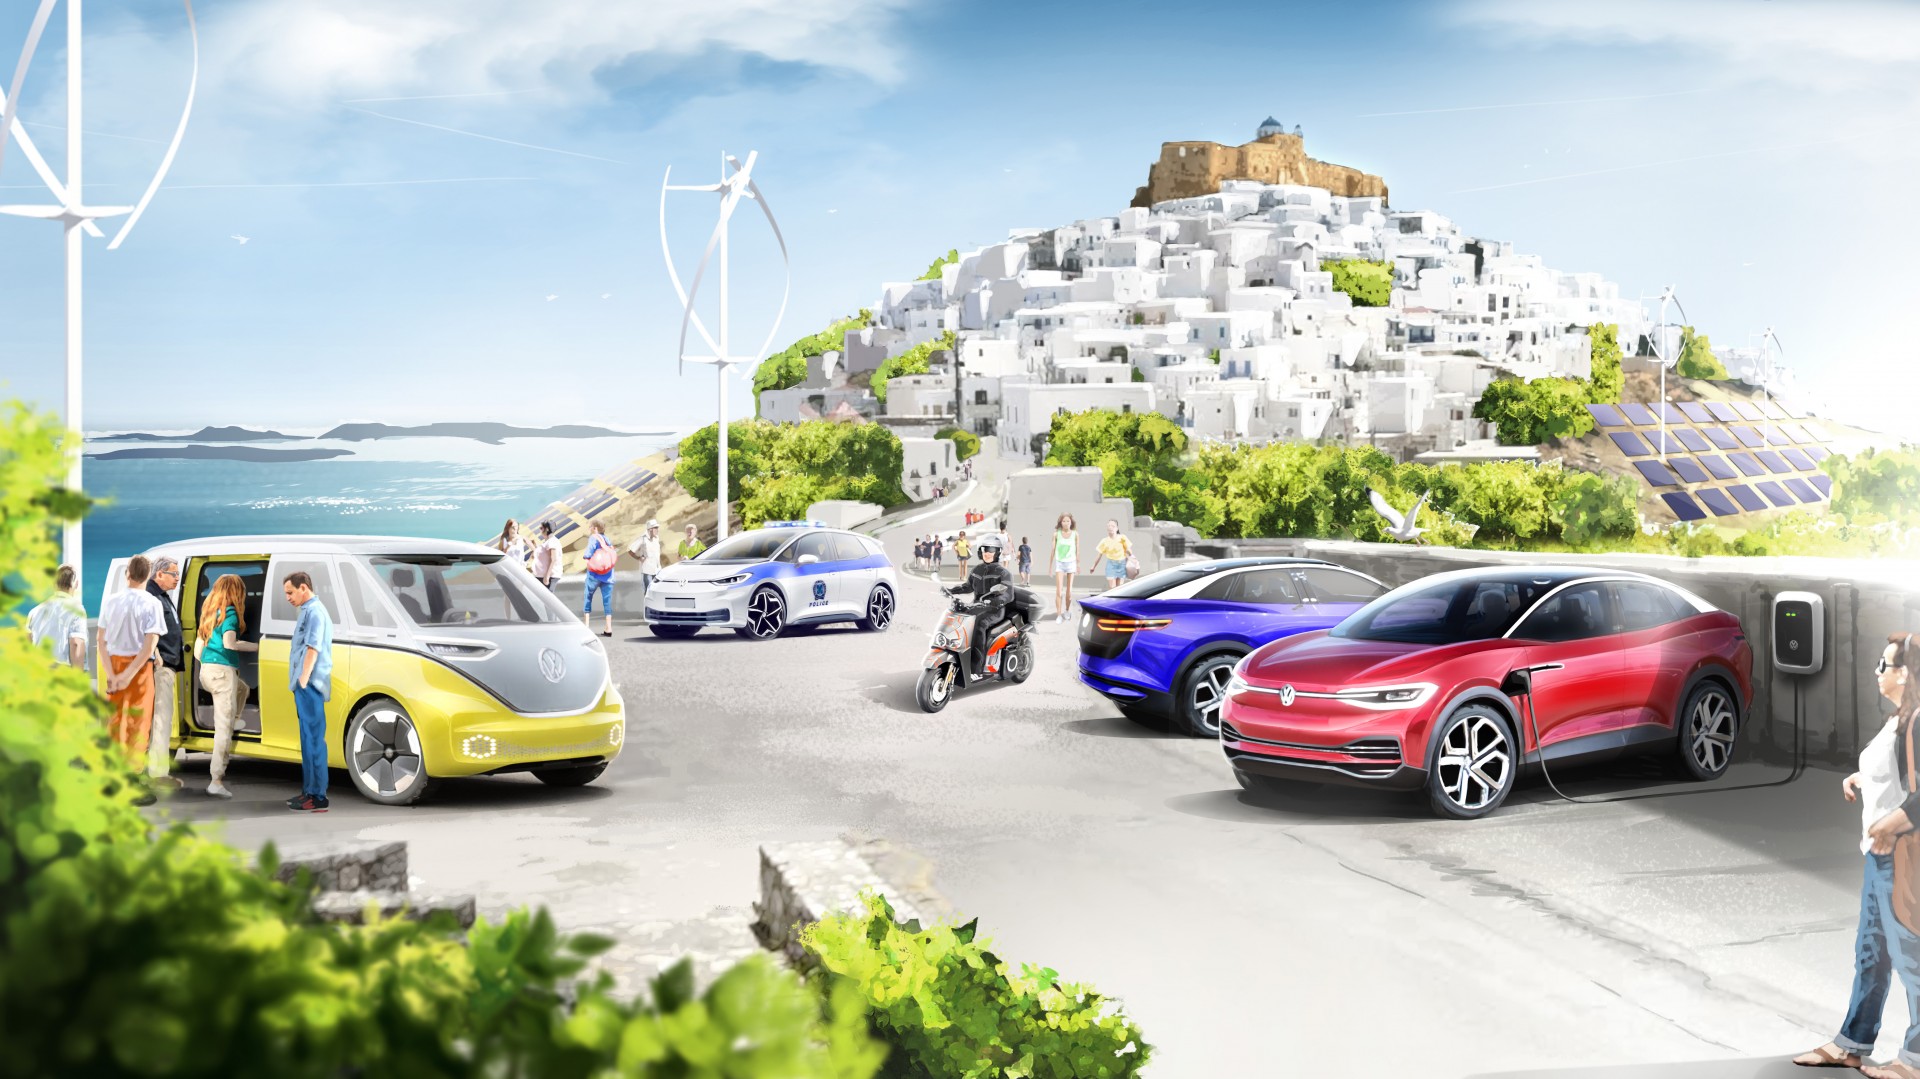 VW and Greece to create model island for sustainable mobility